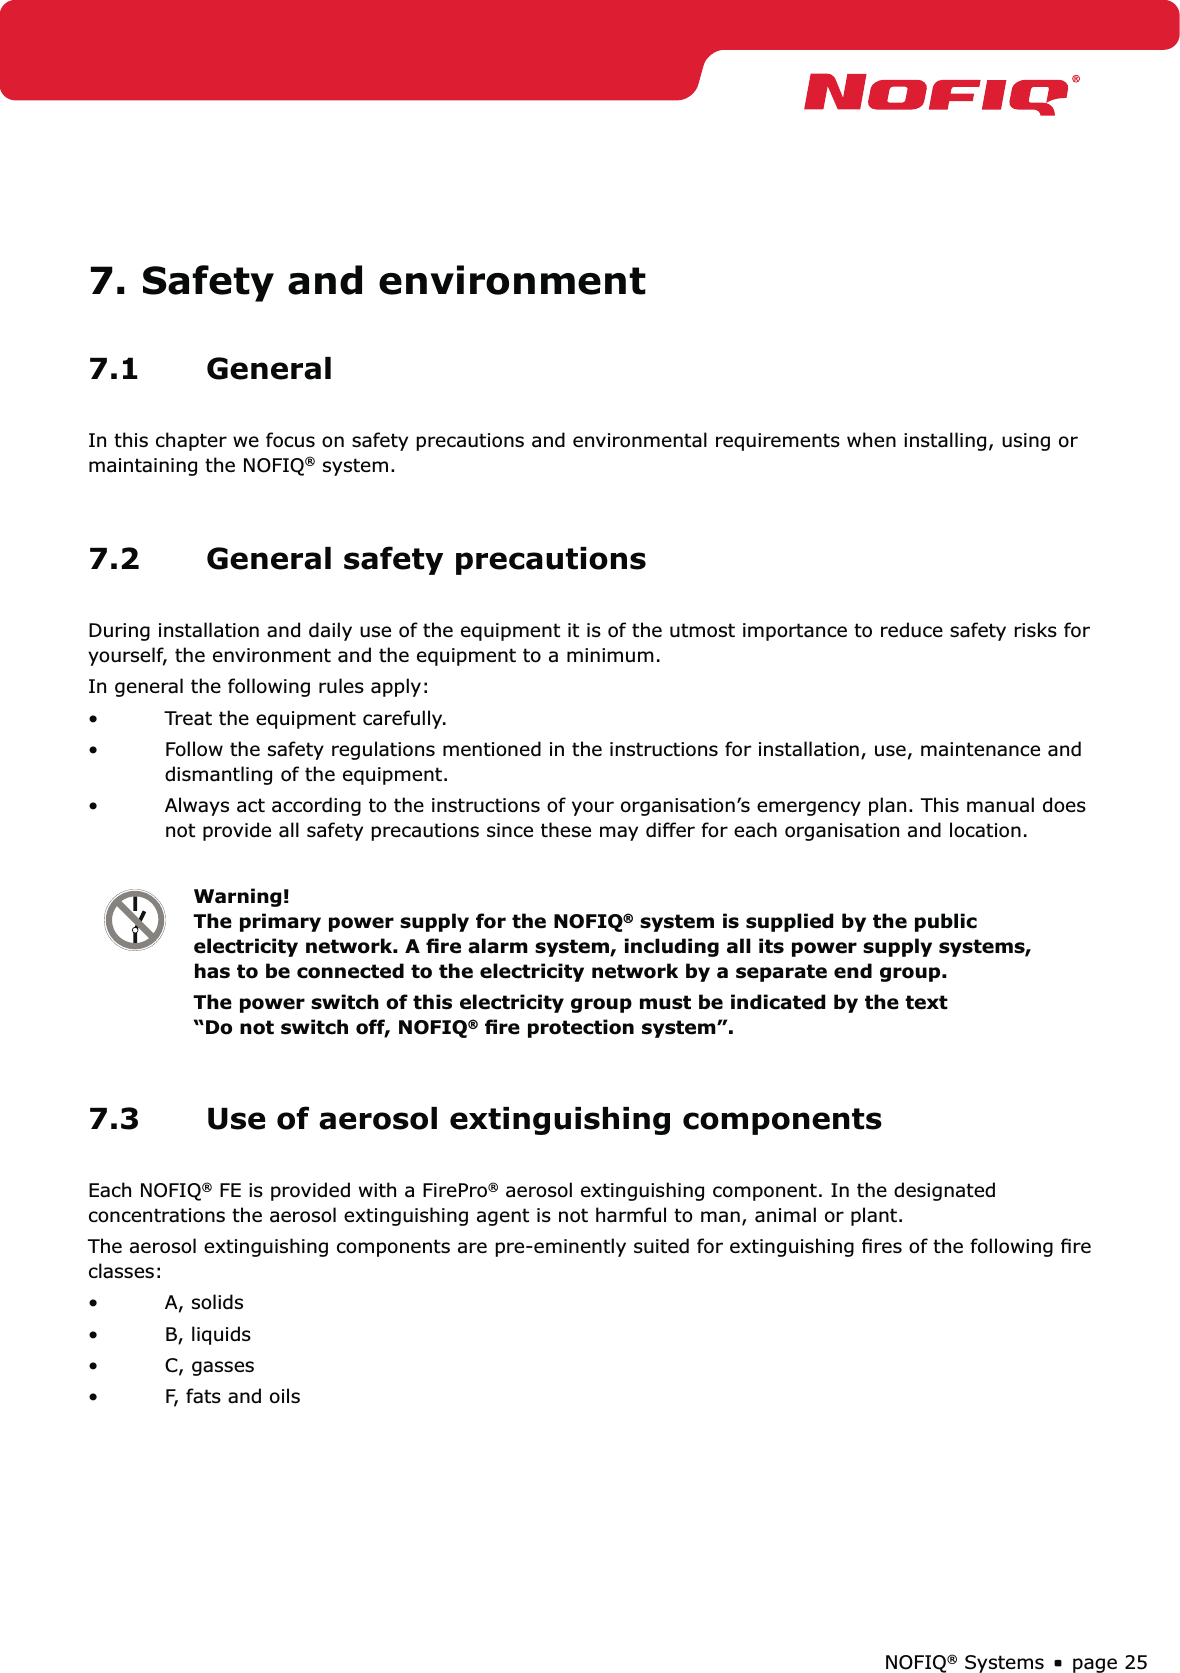 page 25NOFIQ® Systems7. Safety and environment7.1 GeneralIn this chapter we focus on safety precautions and environmental requirements when installing, using or maintaining the NOFIQ® system.7.2  General safety precautionsDuring installation and daily use of the equipment it is of the utmost importance to reduce safety risks for yourself, the environment and the equipment to a minimum. In general the following rules apply:Treat the equipment carefully.• Follow the safety regulations mentioned in the instructions for installation, use, maintenance and • dismantling of the equipment.Always act according to the instructions of your organisation’s emergency plan. This manual does • not provide all safety precautions since these may differ for each organisation and location.Warning! The primary power supply for the NOFIQ® system is supplied by the public electricity network. A ﬁre alarm system, including all its power supply systems, has to be connected to the electricity network by a separate end group.The power switch of this electricity group must be indicated by the text “Do not switch off, NOFIQ® ﬁre protection system”.7.3  Use of aerosol extinguishing componentsEach NOFIQ® FE is provided with a FirePro® aerosol extinguishing component. In the designated concentrations the aerosol extinguishing agent is not harmful to man, animal or plant. The aerosol extinguishing components are pre-eminently suited for extinguishing ﬁres of the following ﬁre classes:A, solids• B, liquids• C, gasses• F, fats and oils• 